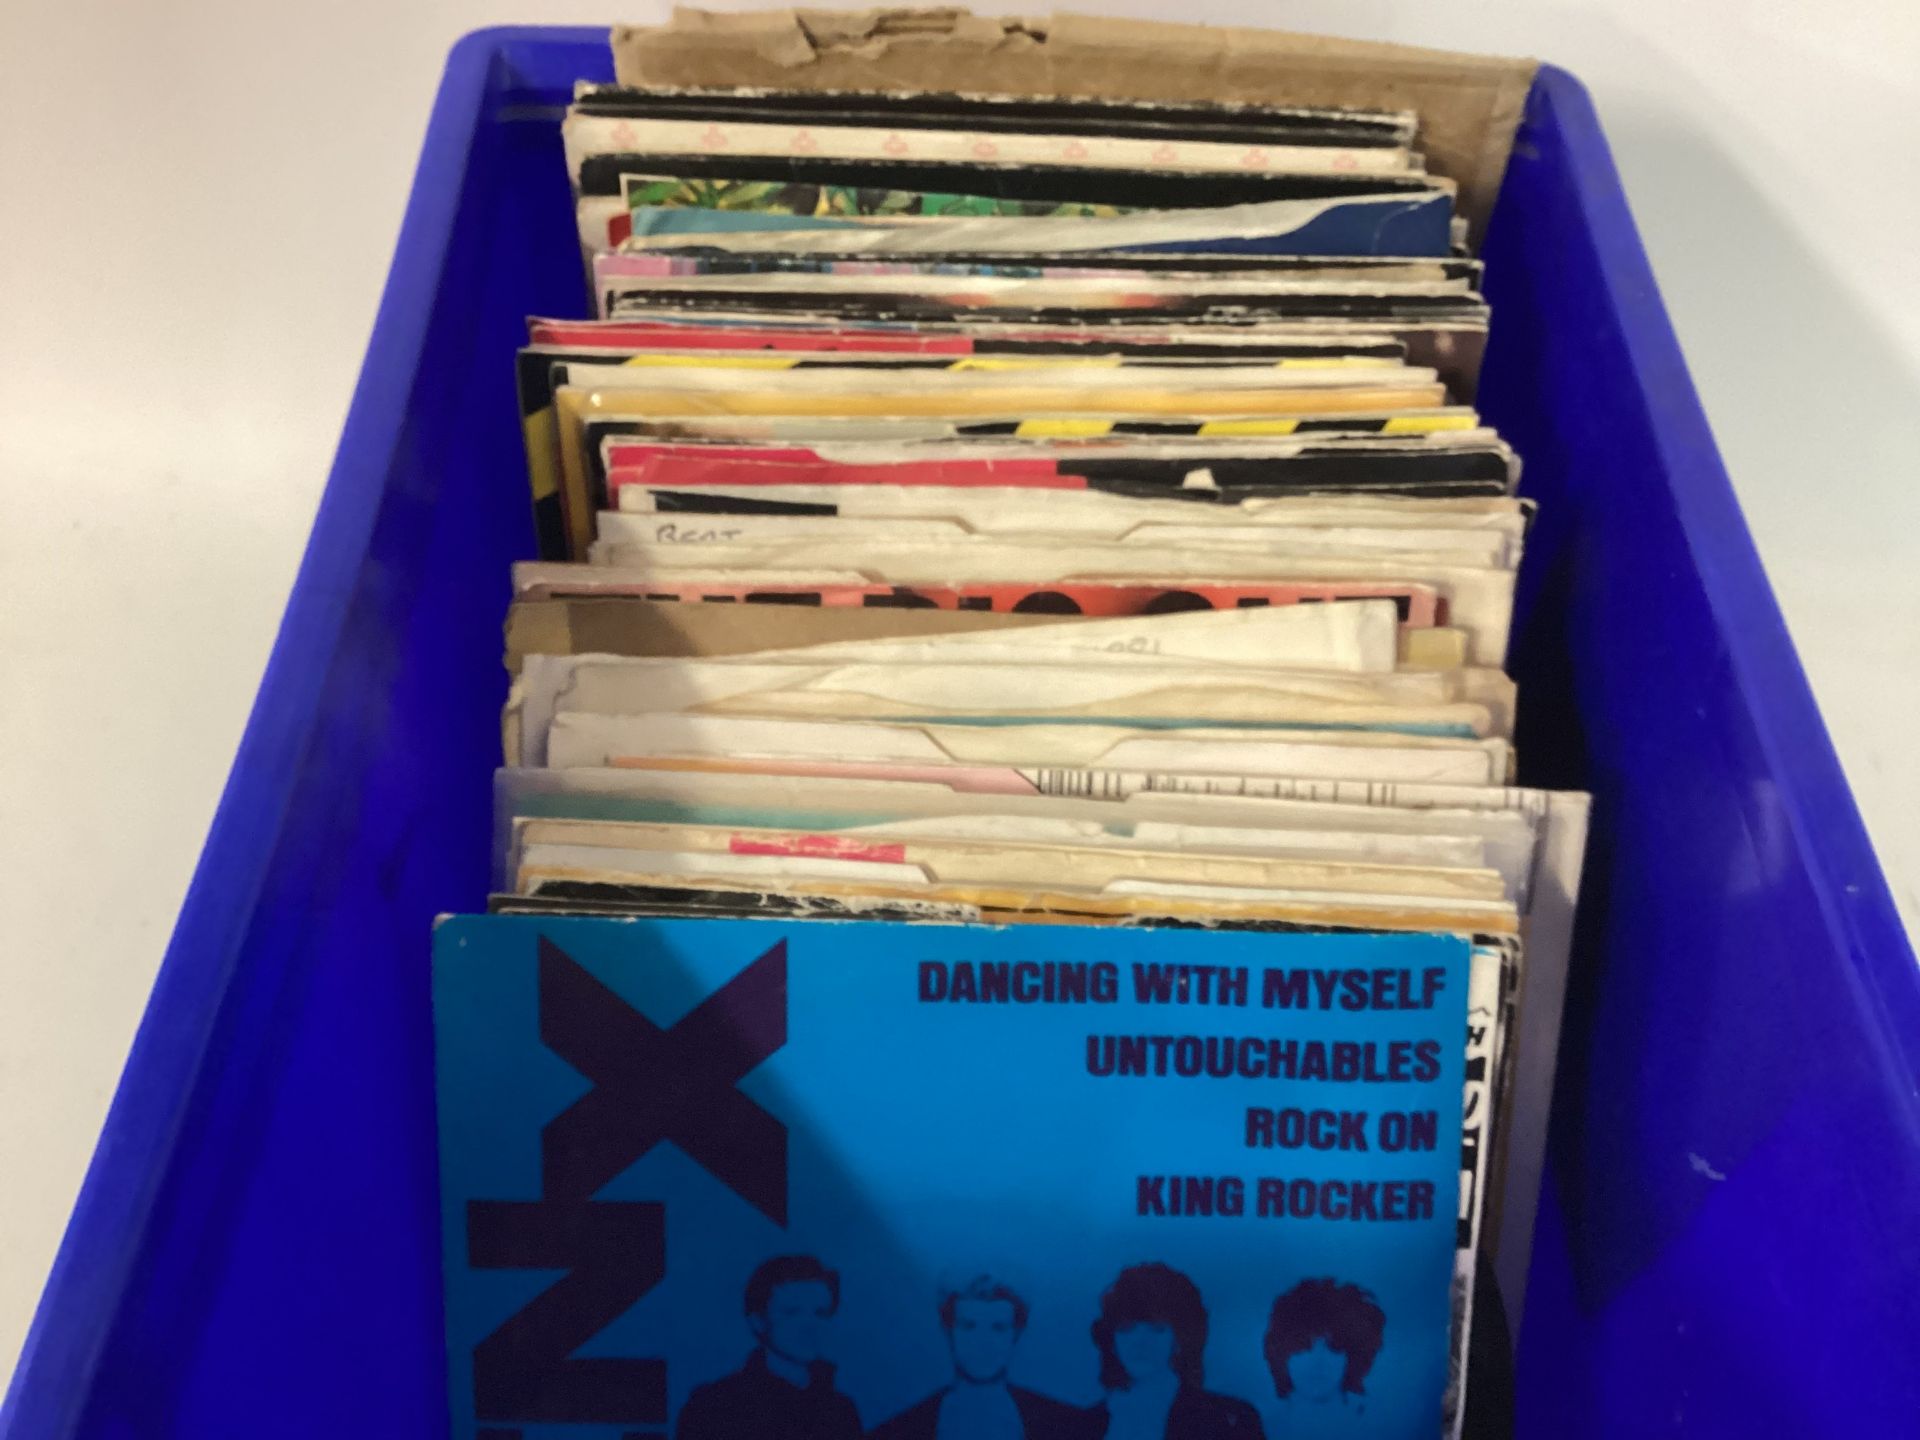 COLLECTION OF VARIOUS SKA - REGGAE - 2 TONE & ROCK SINGLES. This selection contains many artists